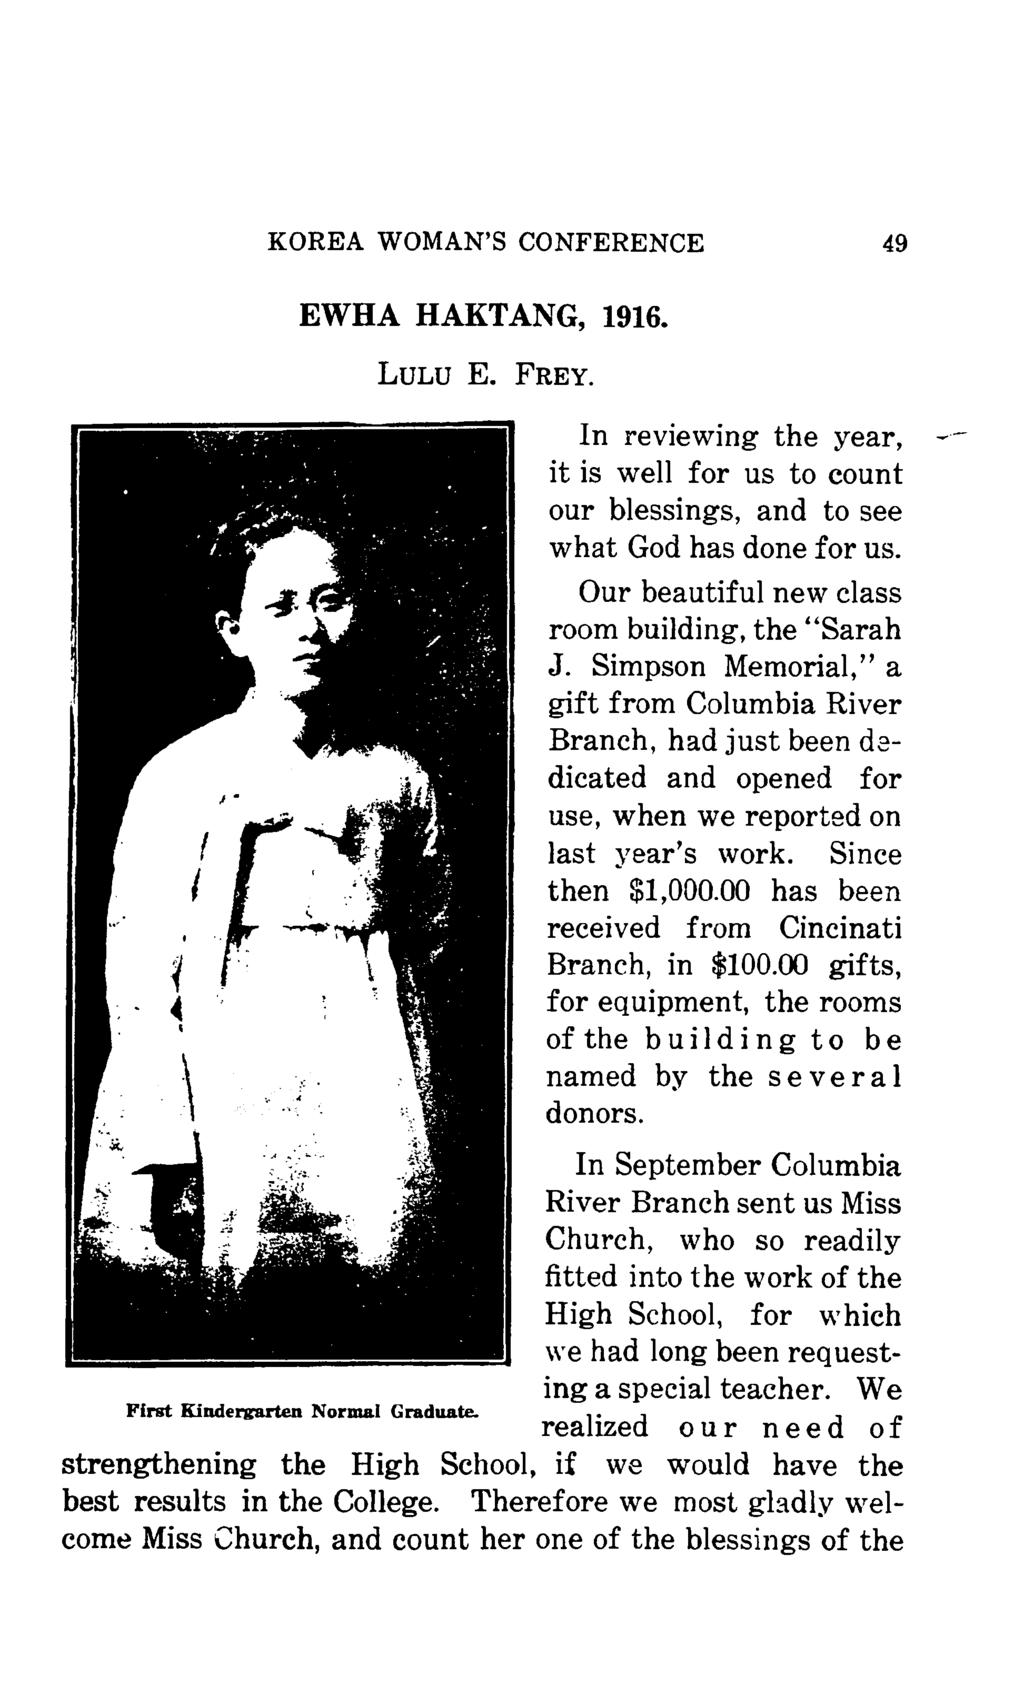 'r'! I i., I KOREA WOMAN'S CONFERENCE 49 EWHA HAKTANG, 1916. ' f'... :: --- LULU E. FREY. In reviewing the year, it is well for us to count our blessings, and to see w hat God has done for us.